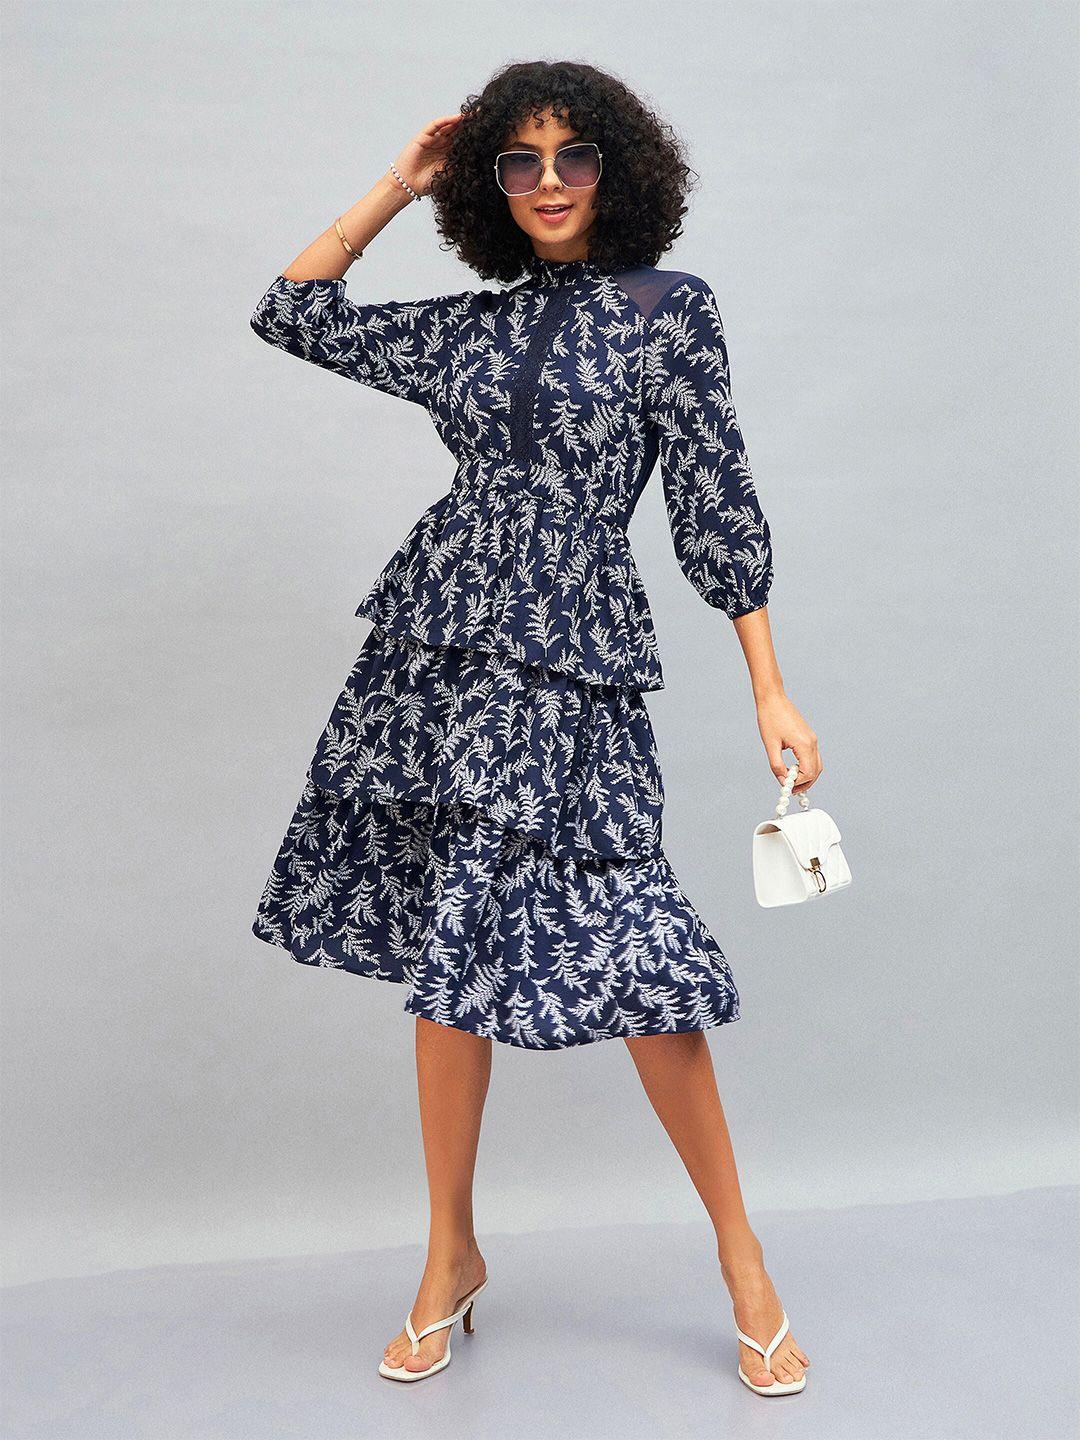 sassafras navy blue floral printed high neck cuffed sleeves layered fit & flare midi dress